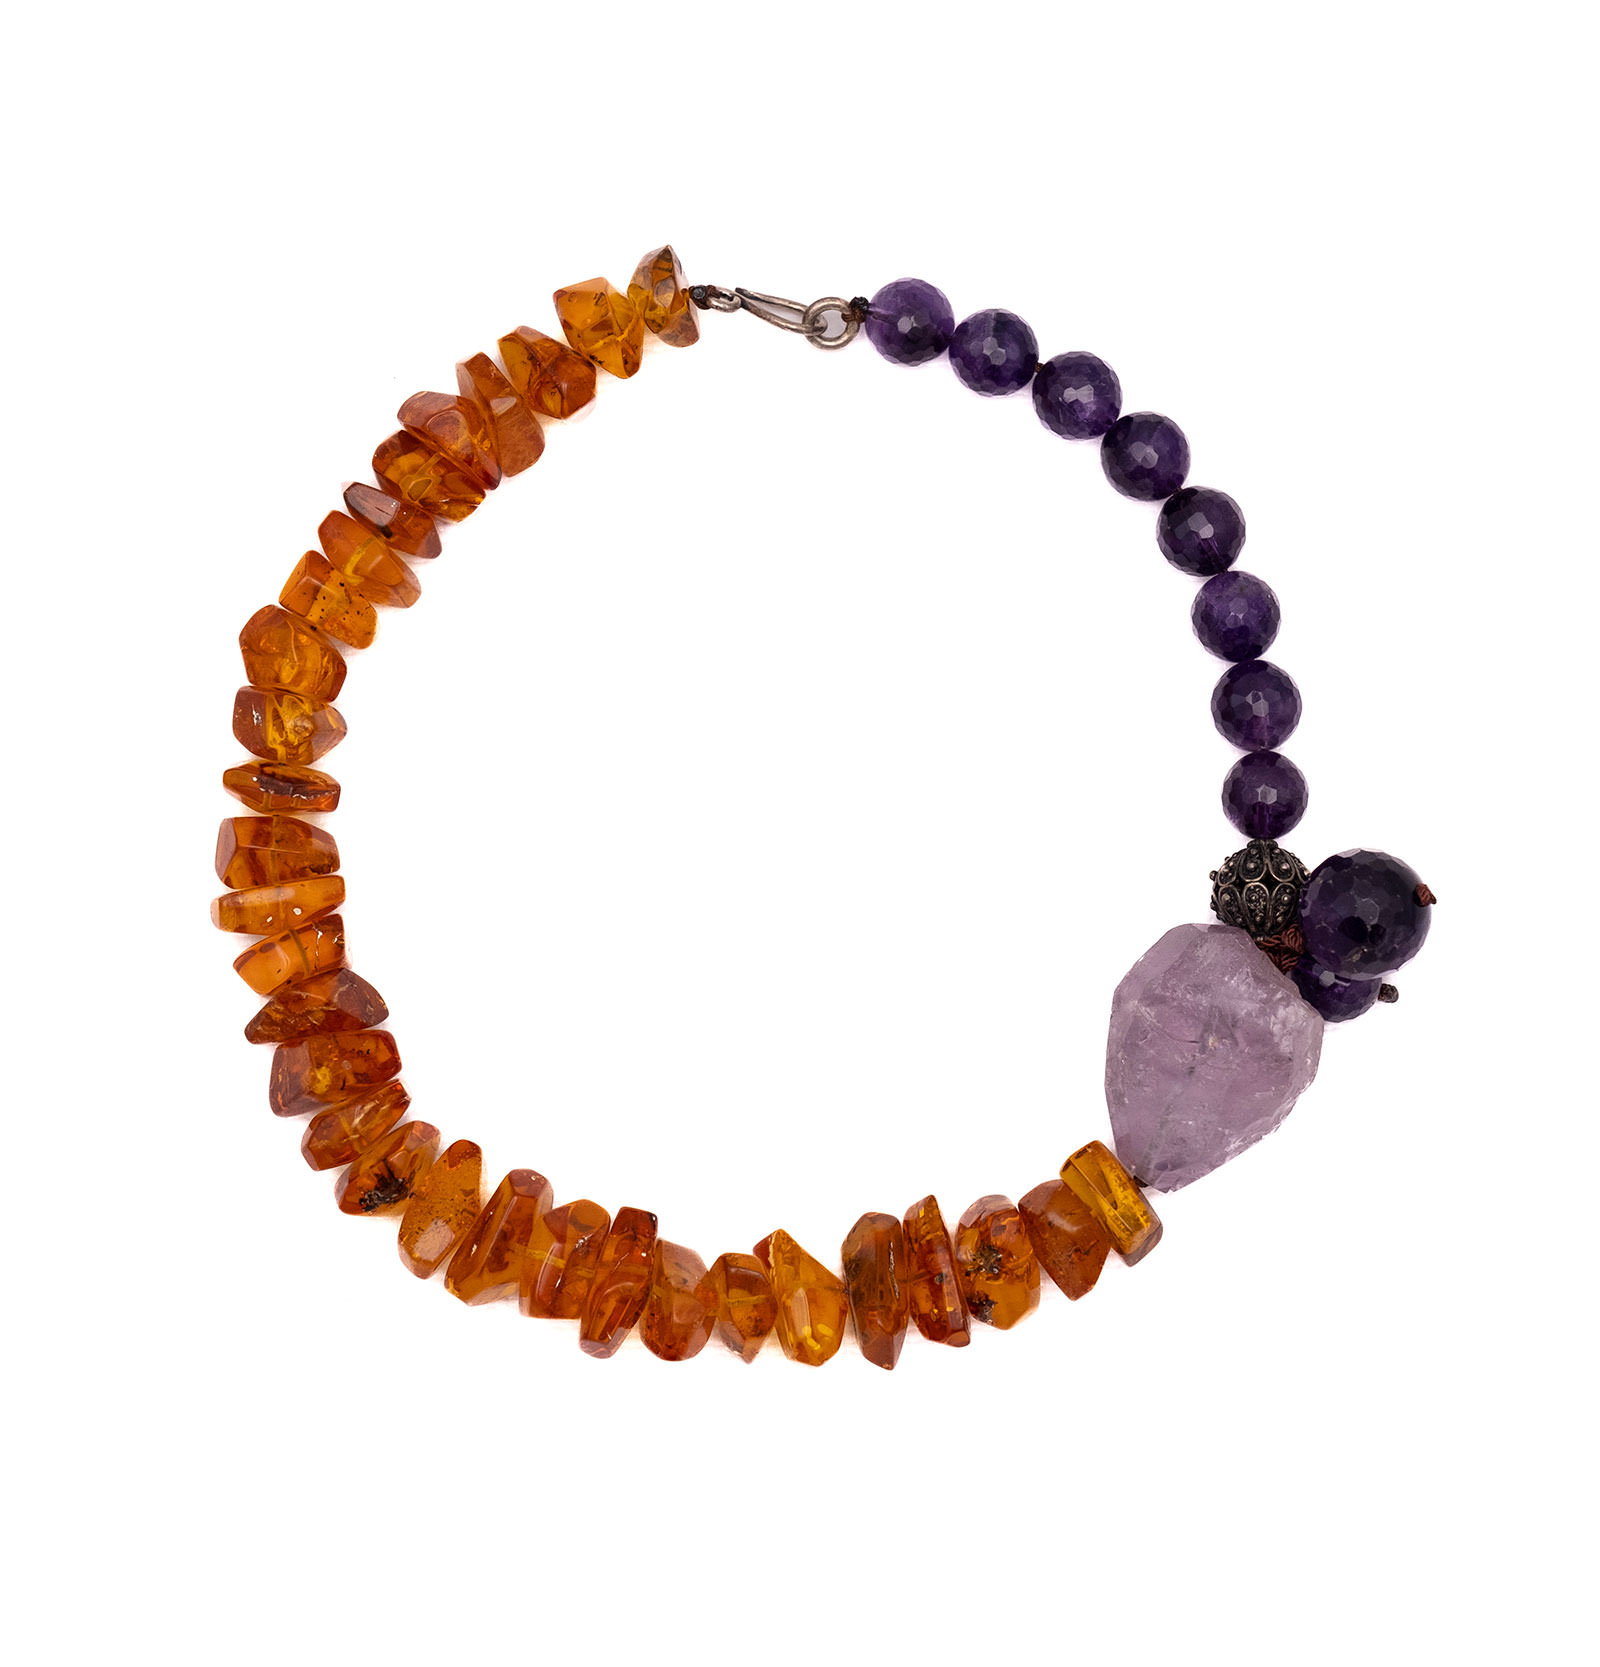 Necklace made of genuine amber from Baltic sea - cut by hand, agate and silver